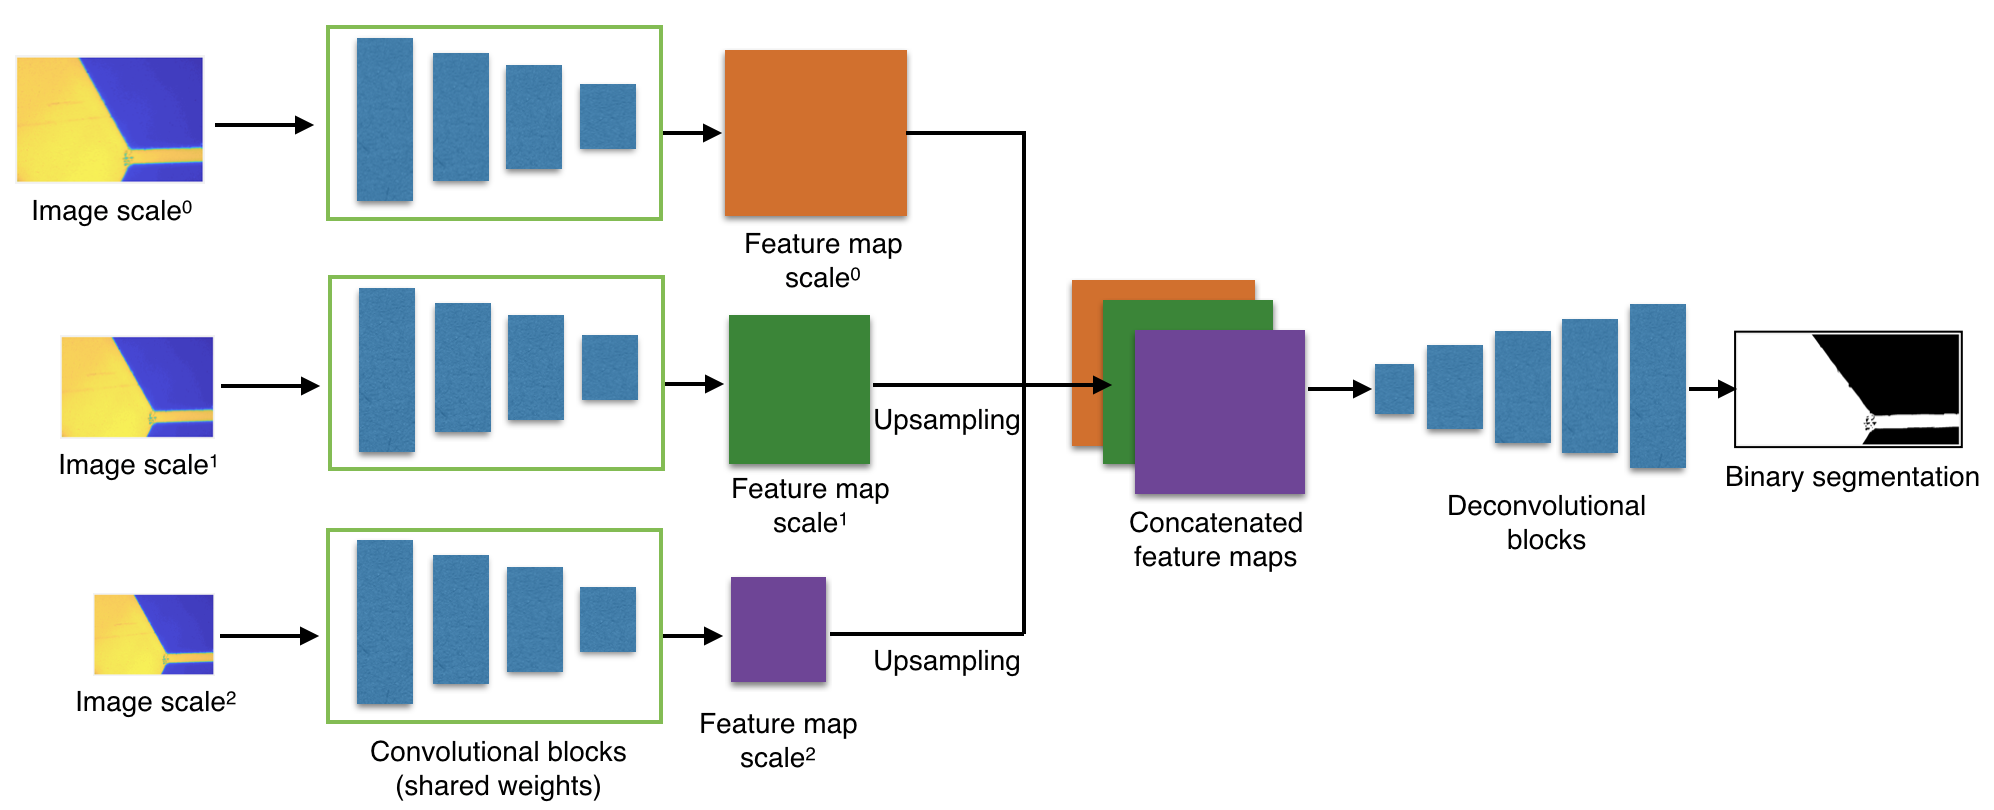 A block diagram of our segmentation network, showing how images at multiple scales are converted to feature maps, concatenated together, and passed through deconvolutional blocks before a binary segmentation is output.